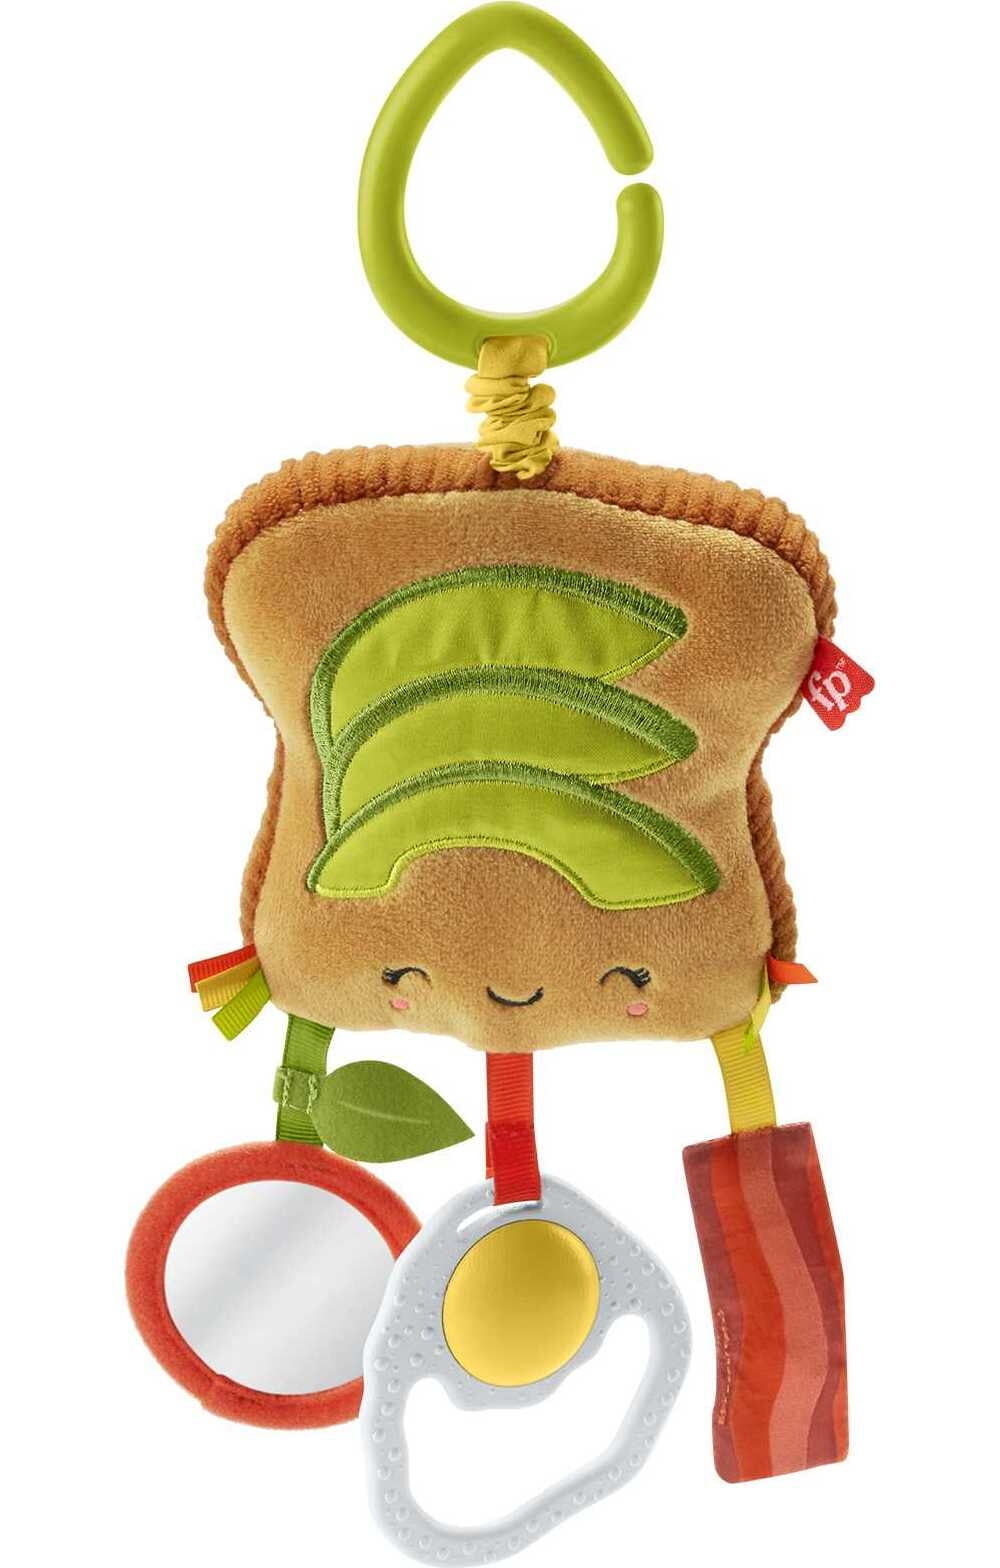 Fisher-Price Brunch & Go Stroller Toy Pretend Food Baby Toys for Sensory Play